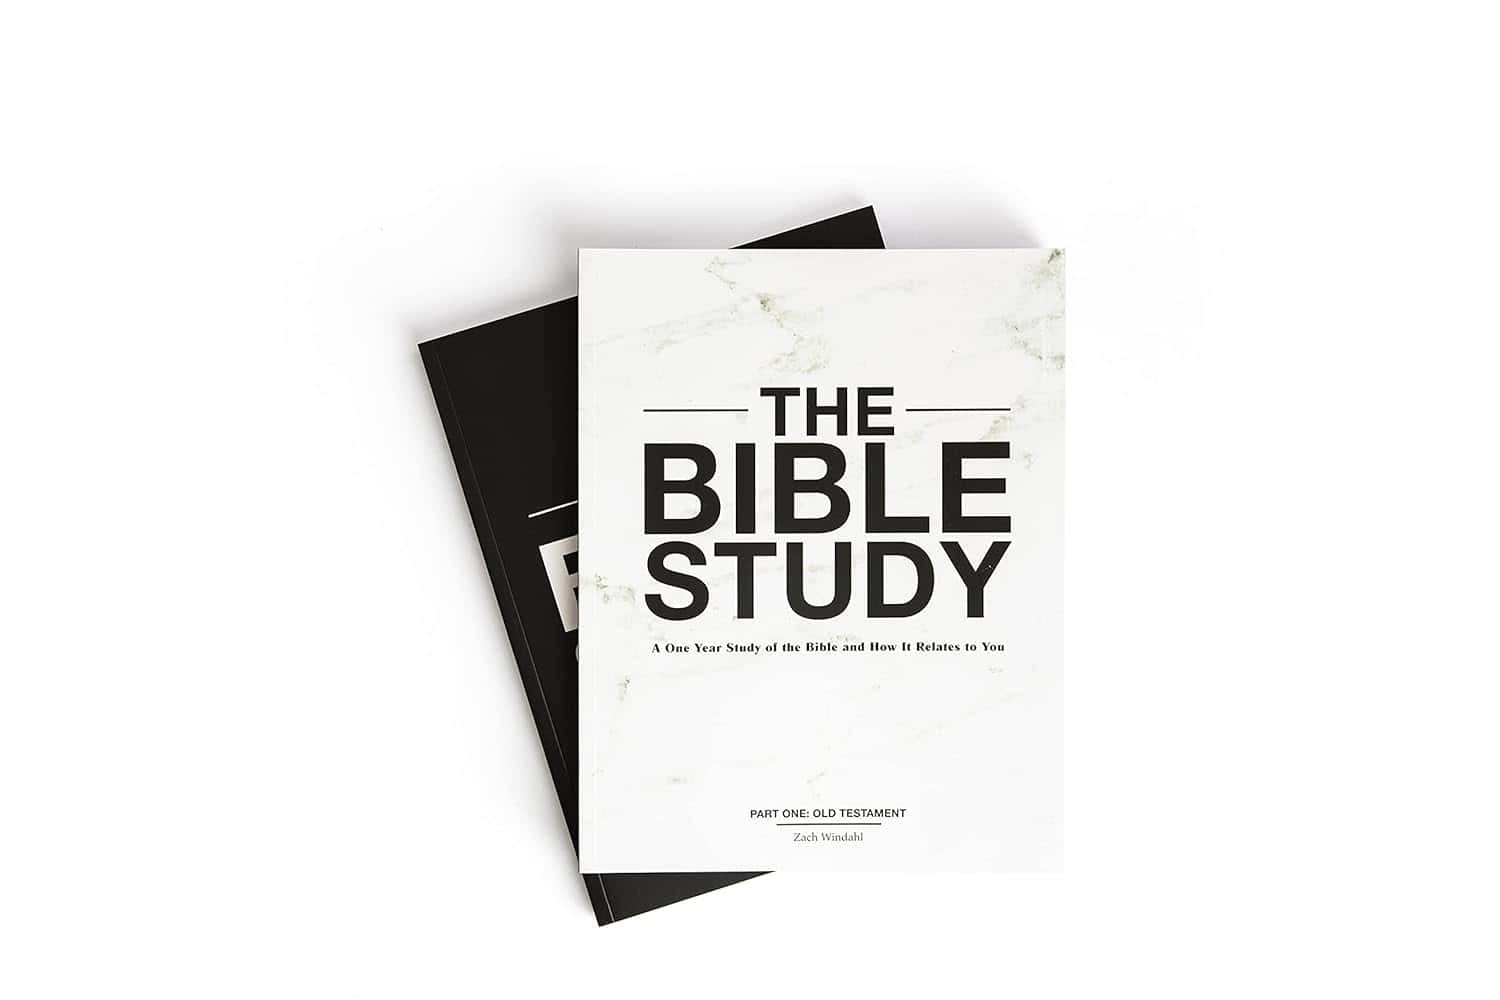 The Bible Study A One-Year Study of the Bible and How It Relates to You by Zach Windahl